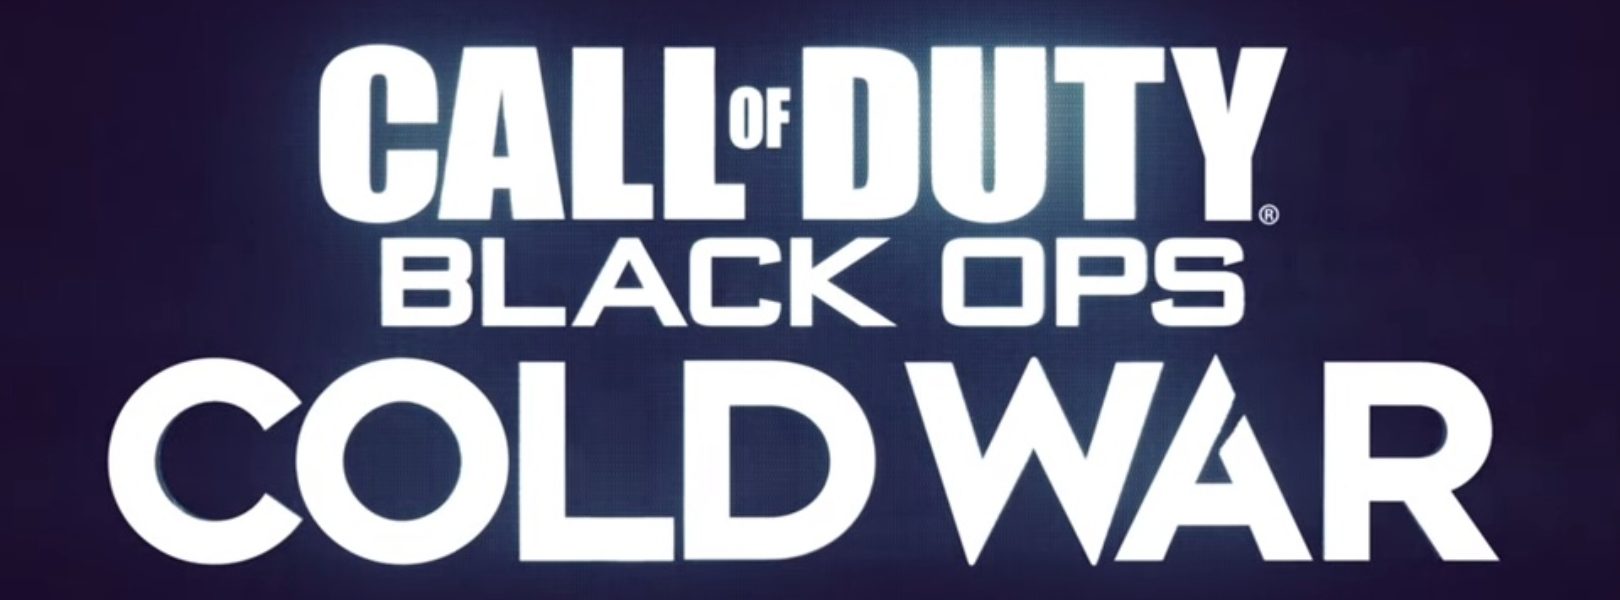 when does the call of duty black ops cold war beta come out